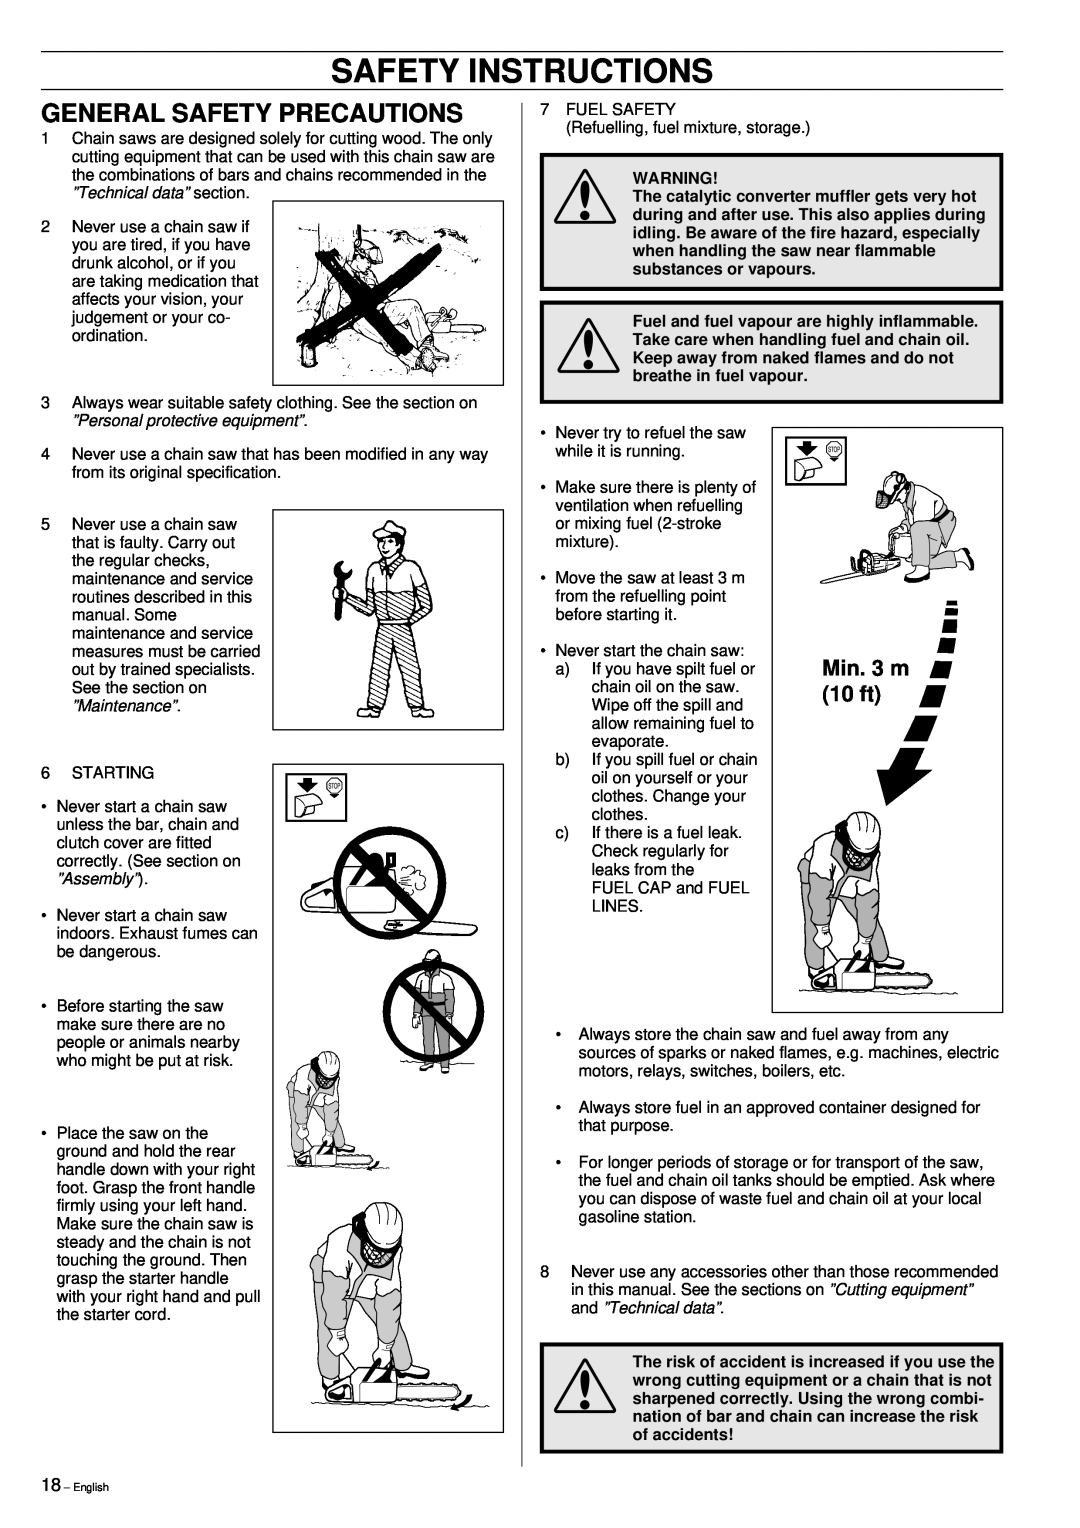 Jonsered 2149 manual General Safety Precautions, Min. 3 m, 10 ft, ”Technical data” section, ”Personal protective equipment” 